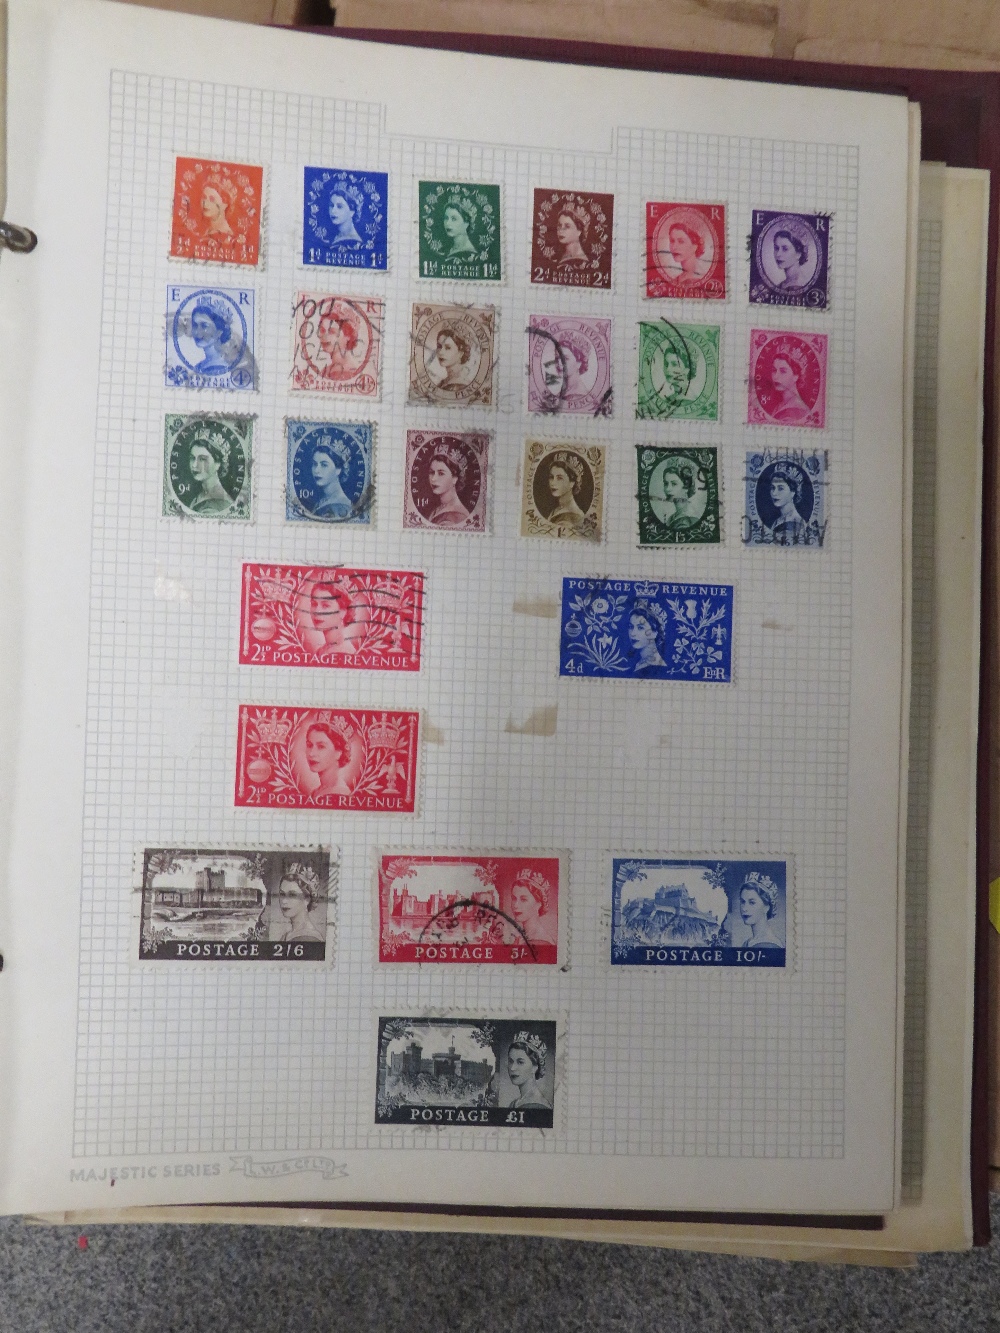 A LARGE QUANTITY OF STAMPS ETC OVER SEVERAL ALBUMS, FIRST DAY COVERS ETC - Image 2 of 4